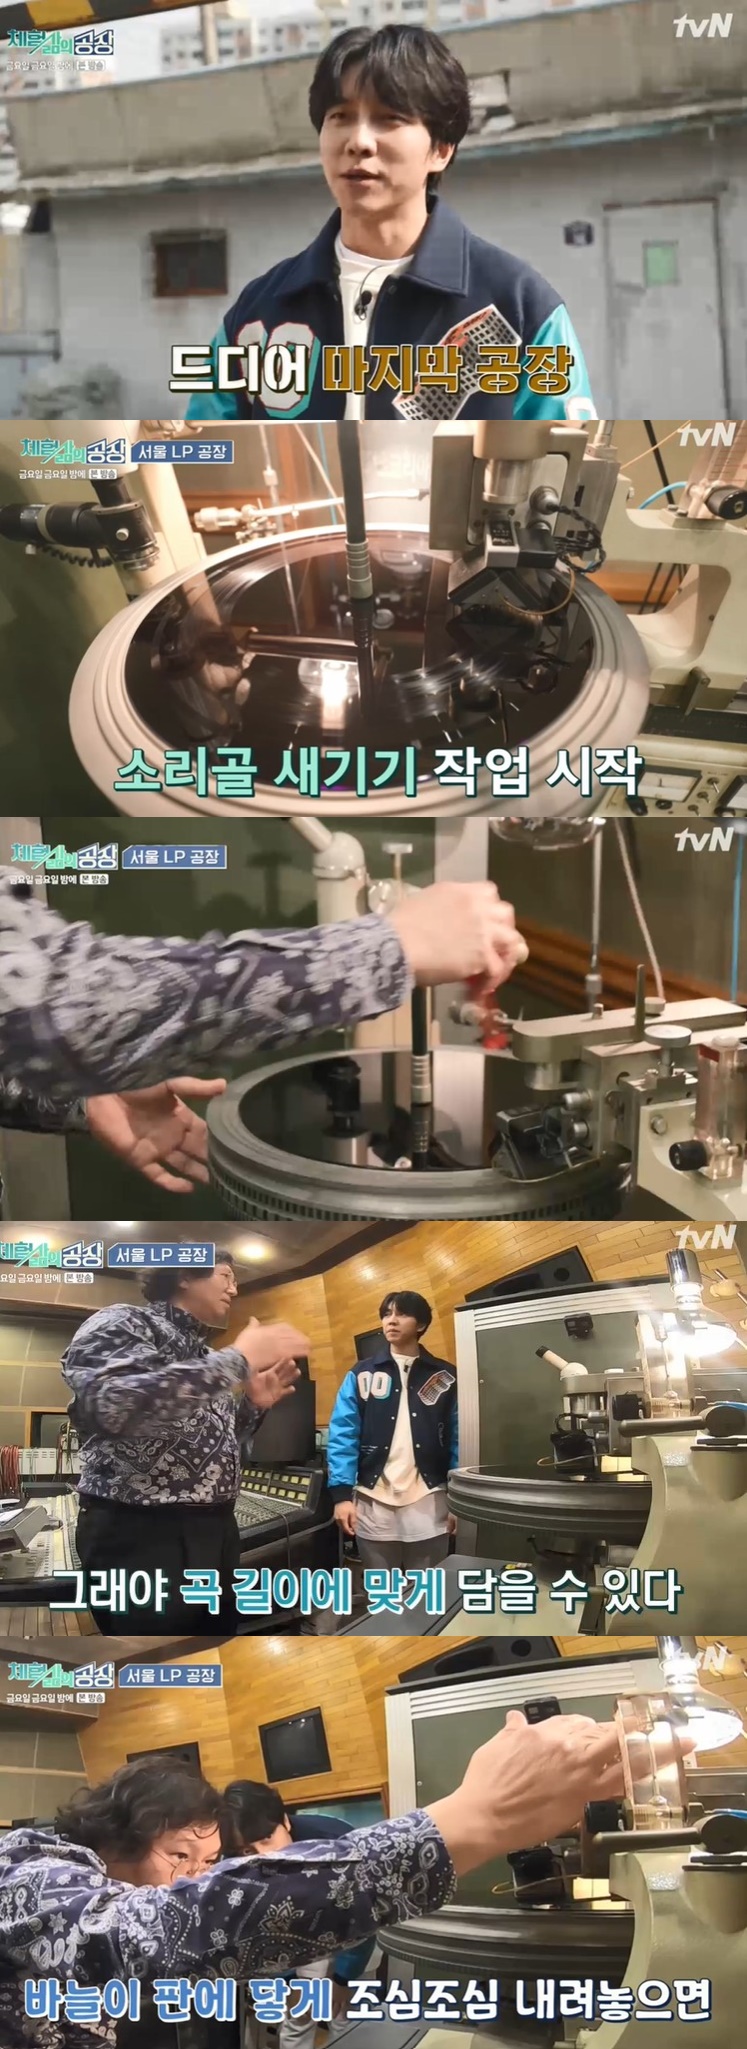 Lee Seung-gi met the only LP engineer in Korea at Friday night.Lee Seung-gi, who visited the LP edition factory, was portrayed in the Friday Night TVN entertainment program, which was broadcast on the 20th.Lee Seung-gi showed a special excitement before going to the LP plate factory.Lee Seung-gi, a 17-year singer in 2004 and a year of this year, confessed, I wanted to have this once when I released the album.Lee Seung-gi, who met the only LP engineer in Korea, Baek Hee-seong, watched the work of making a sound goal on the original plate.Lee Seung-gi said, I also made an album, but I first knew that there was only one person who made an LP version.Lee Seung-gi laughed at the words that he was not yet training juniors, saying, I want to learn.We needed a sound machine to make an LPG plate, but there was only one in the country, so we went and persuaded them, said Baek Hee-Seong.Mr. Baek Hee-seong surprised Lee Seung-gi by explaining that it is a sounding principle in a thinner place than a head.